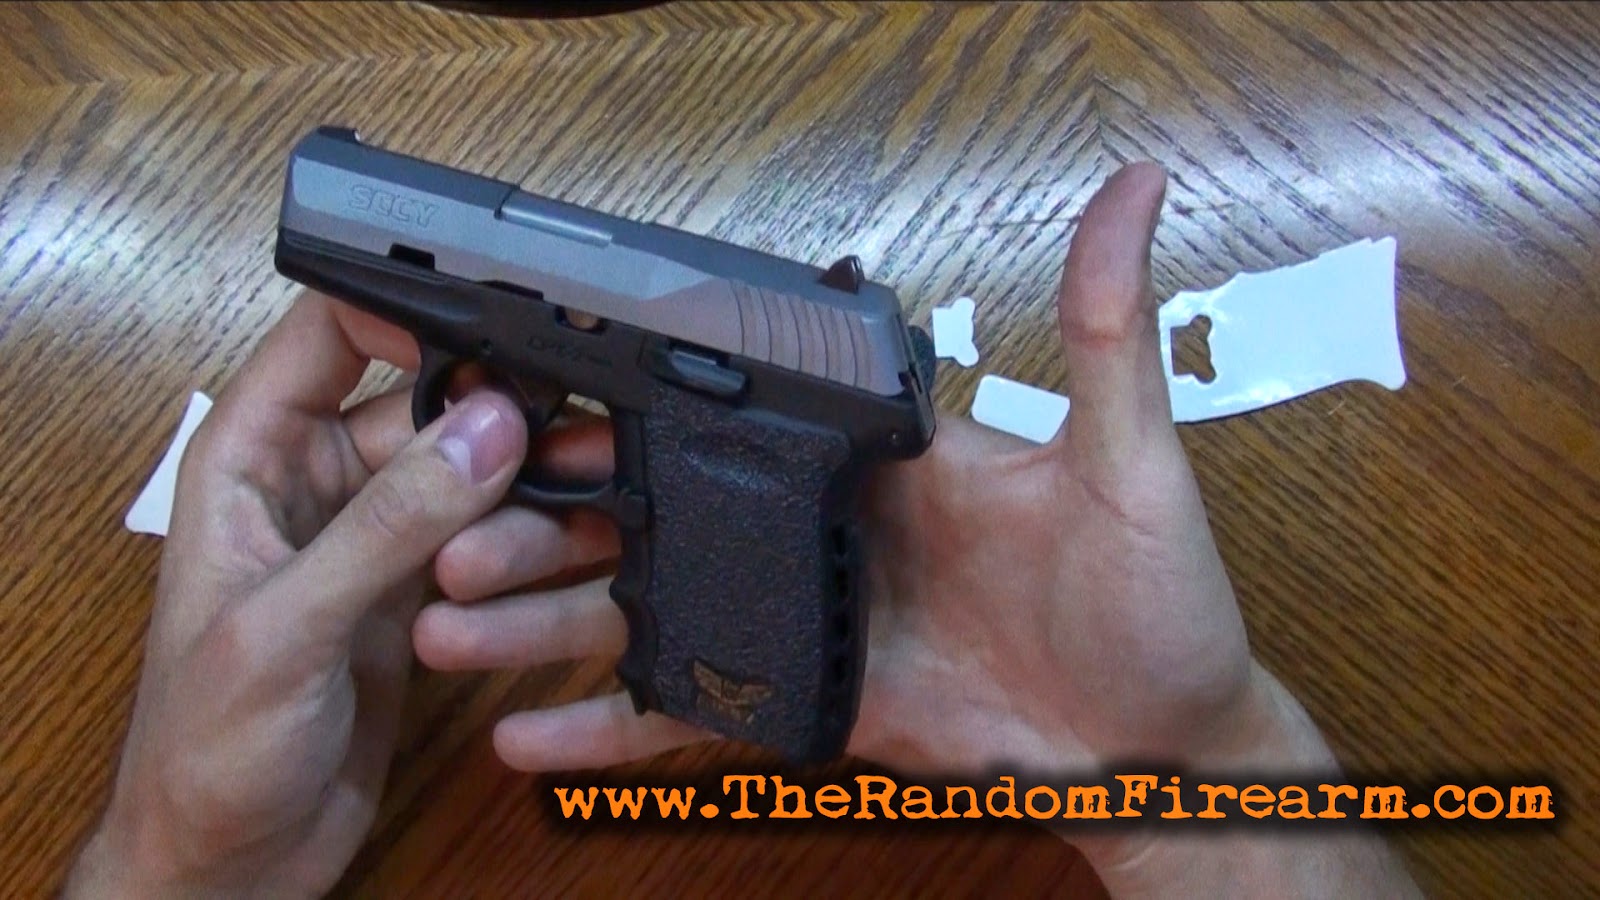 sccy cpx 2 review traction grips 9mm galloway precision guns handgun pistol concealed carry